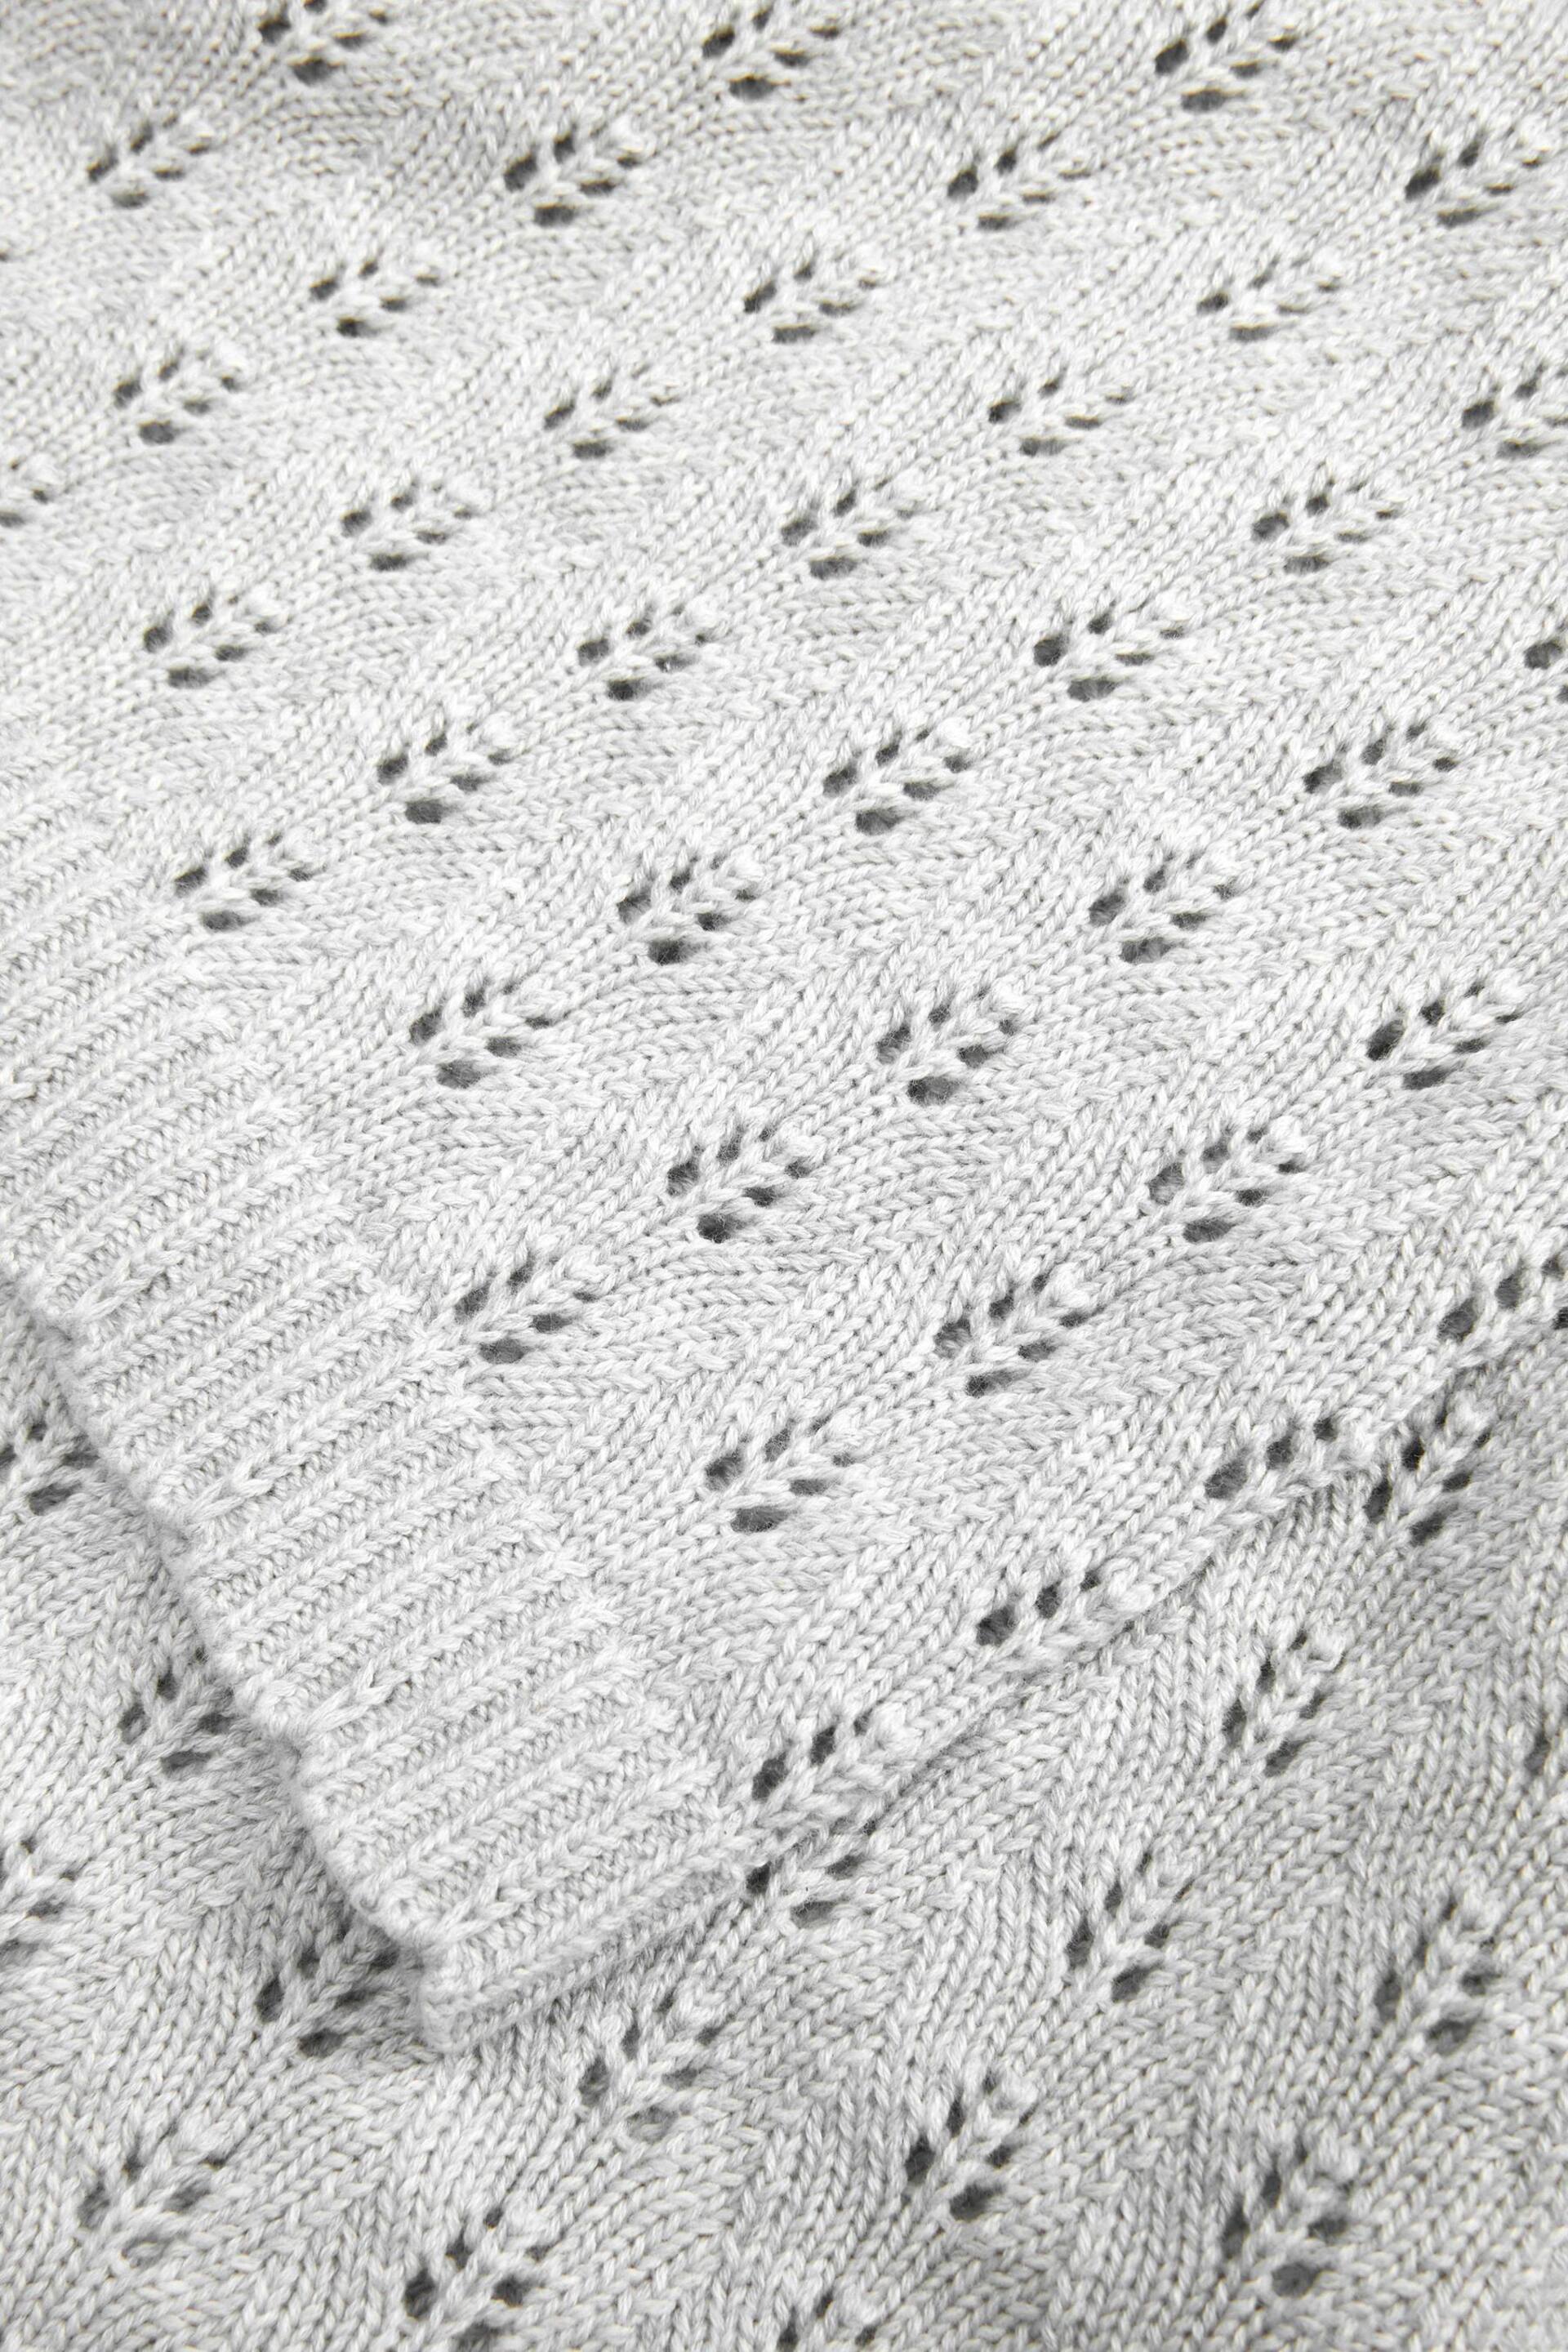 The Little Tailor Cotton Pointelle Baby Blanket - Image 4 of 4